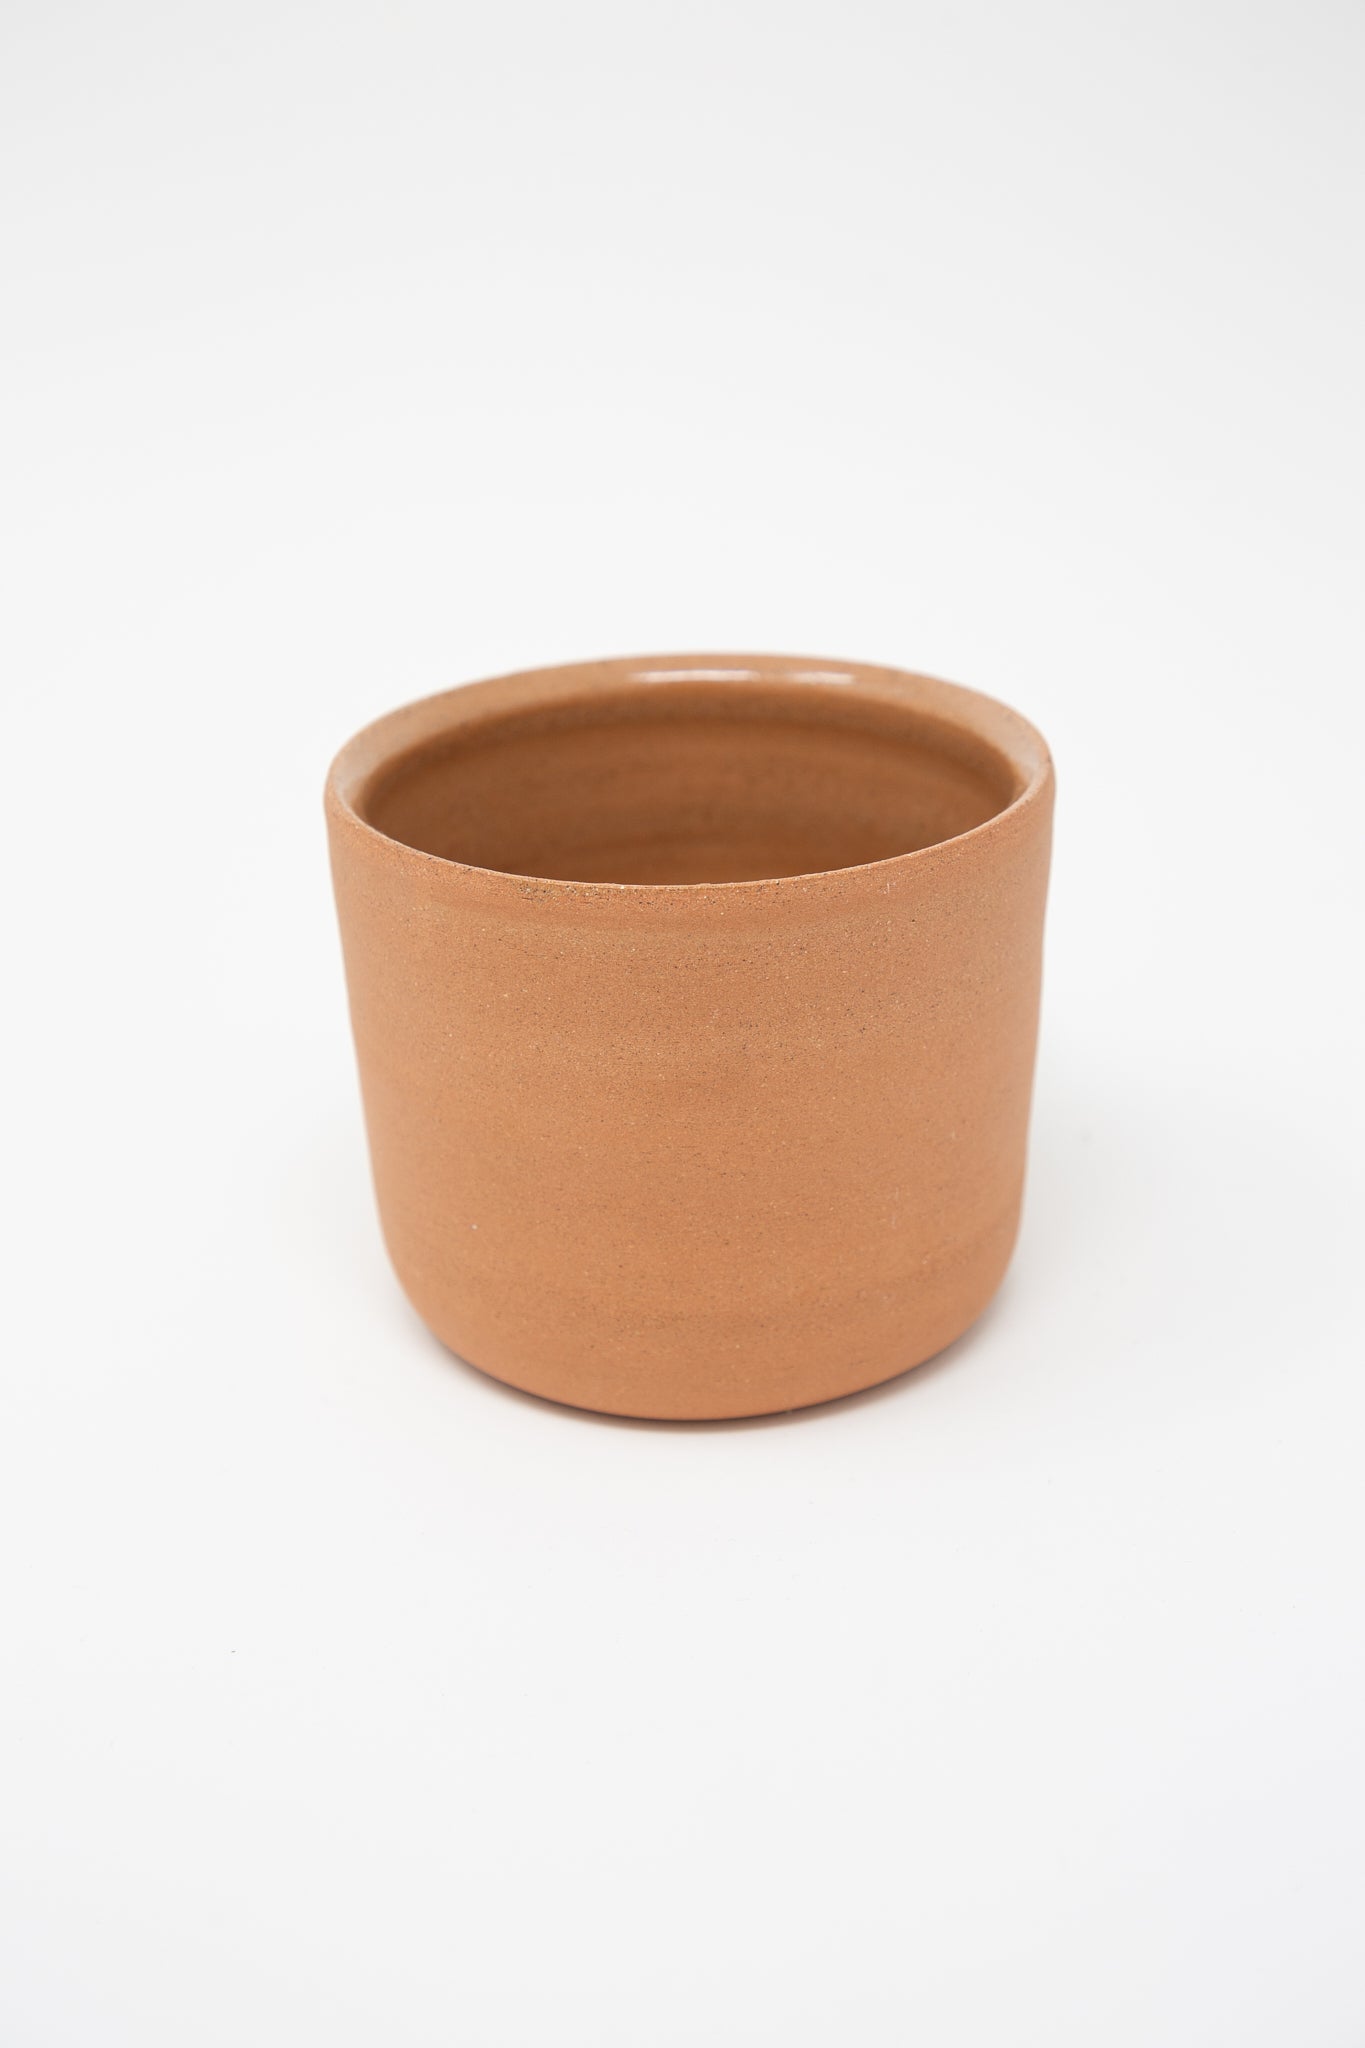 A small handmade Lost Quarry terracotta mug on a white background. Back view.